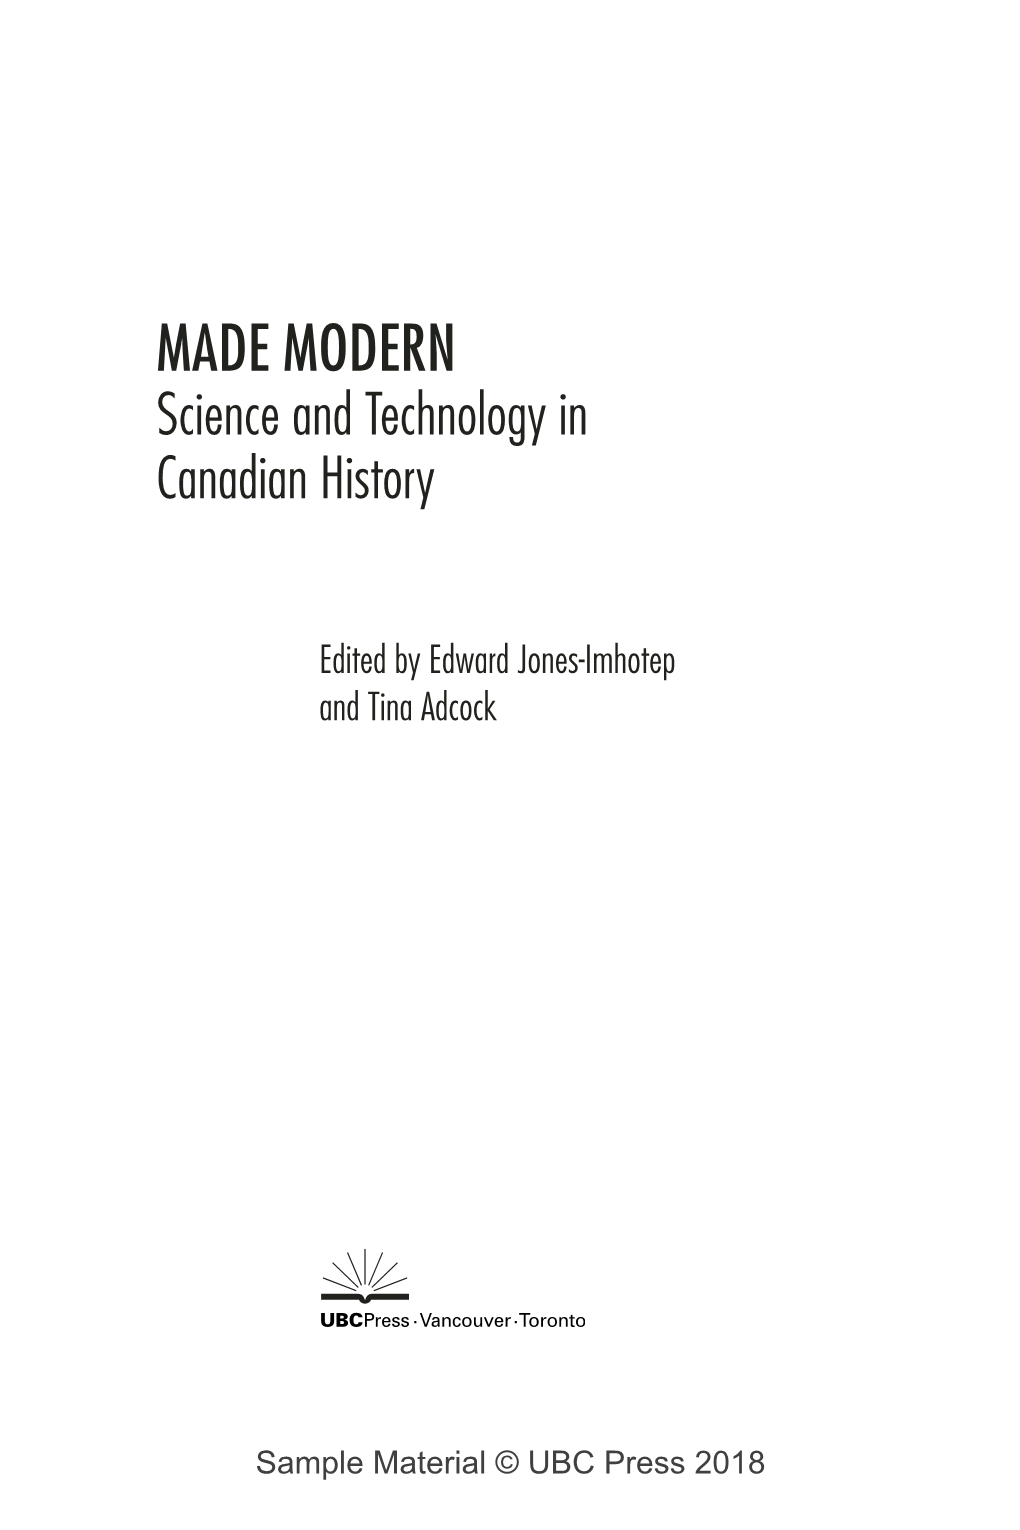 MADE MODERN Science and Technology in Canadian History